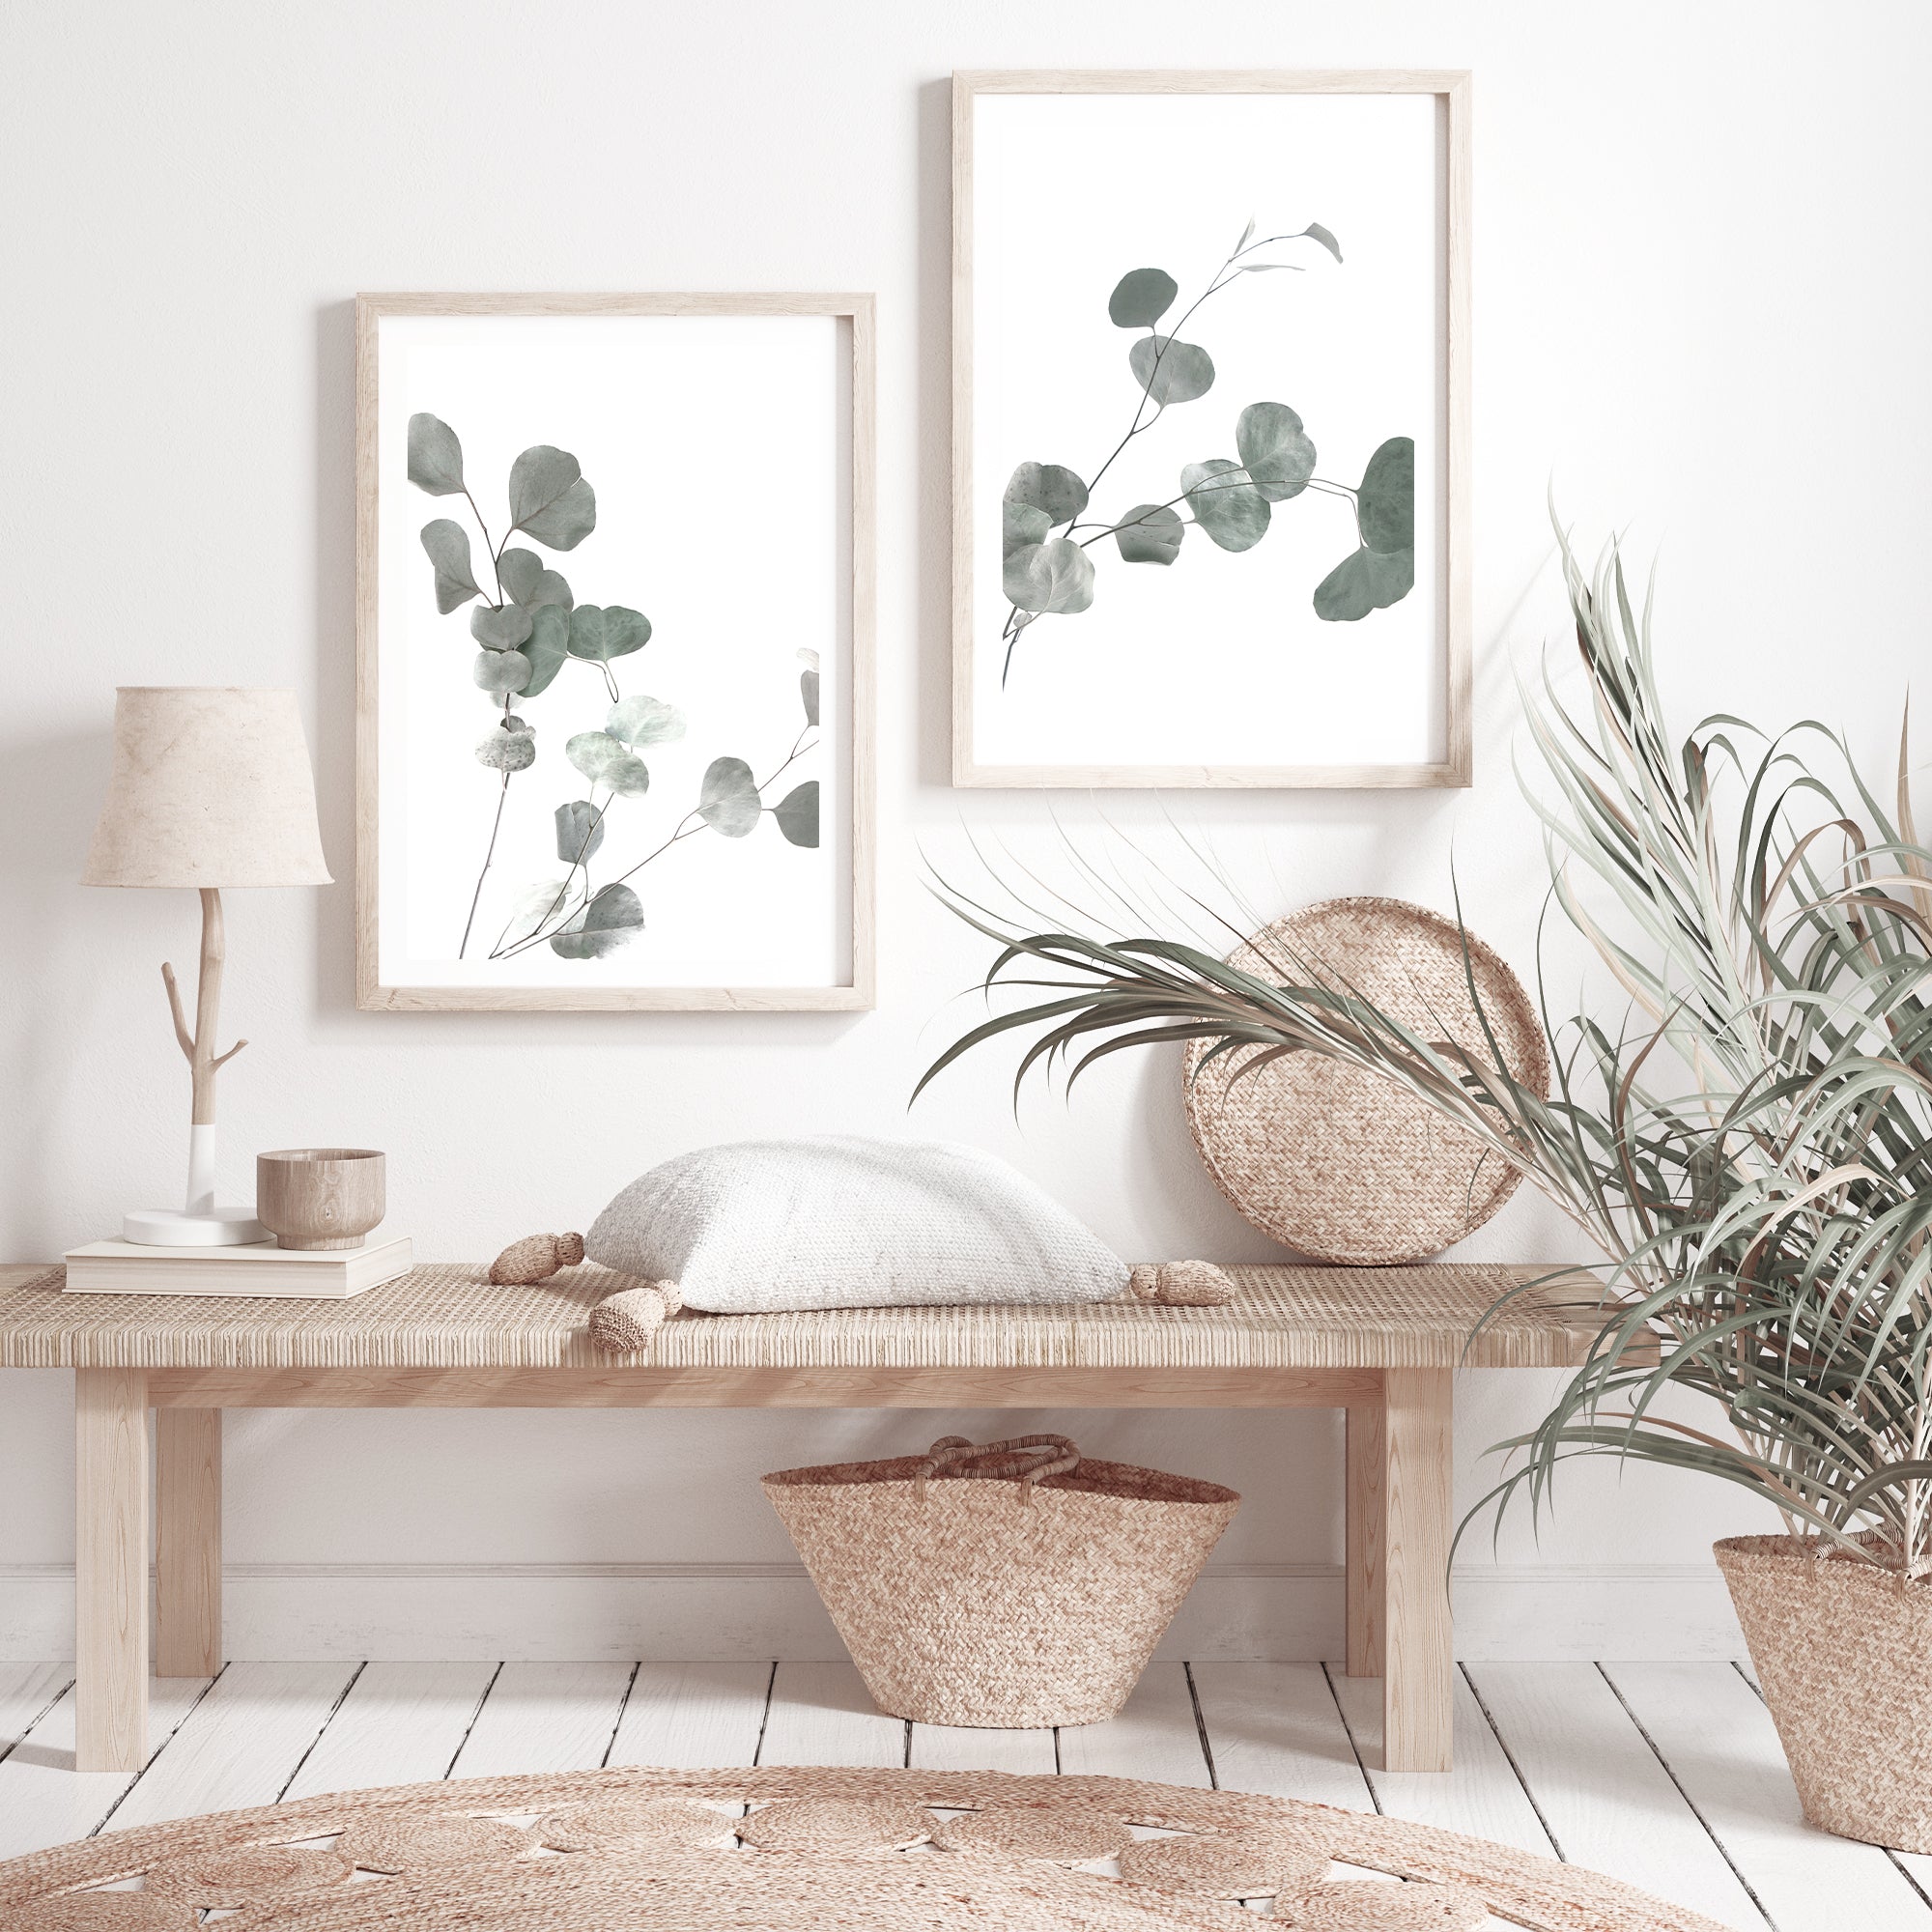 A set of 2 wall art prints of the Australian Native Eucalyptus leaves with a neutral white background.